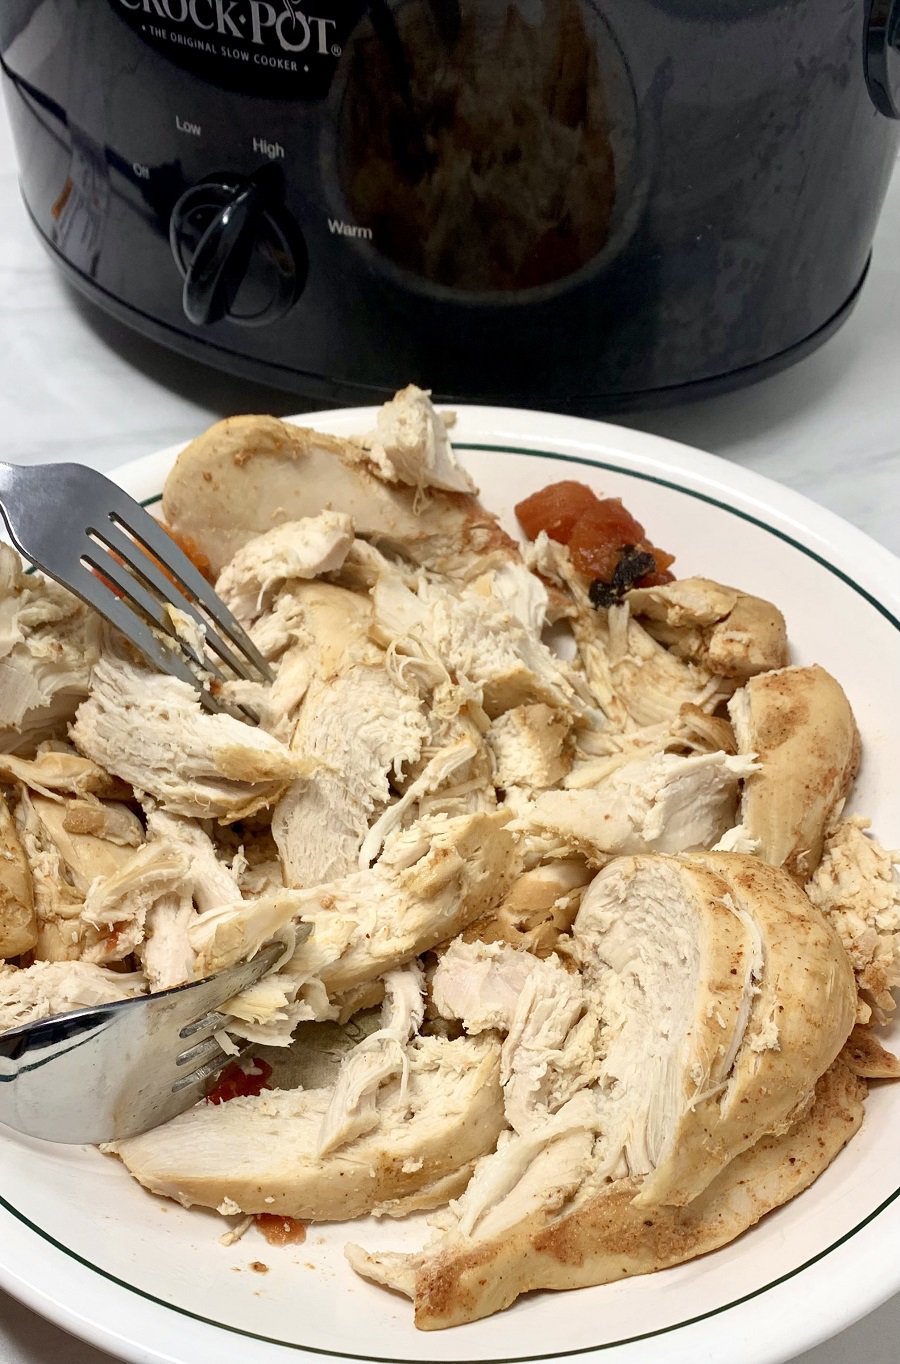 Crockpot Chicken Bowls Party Food Recipe Person Shredding Chicken on a Plate